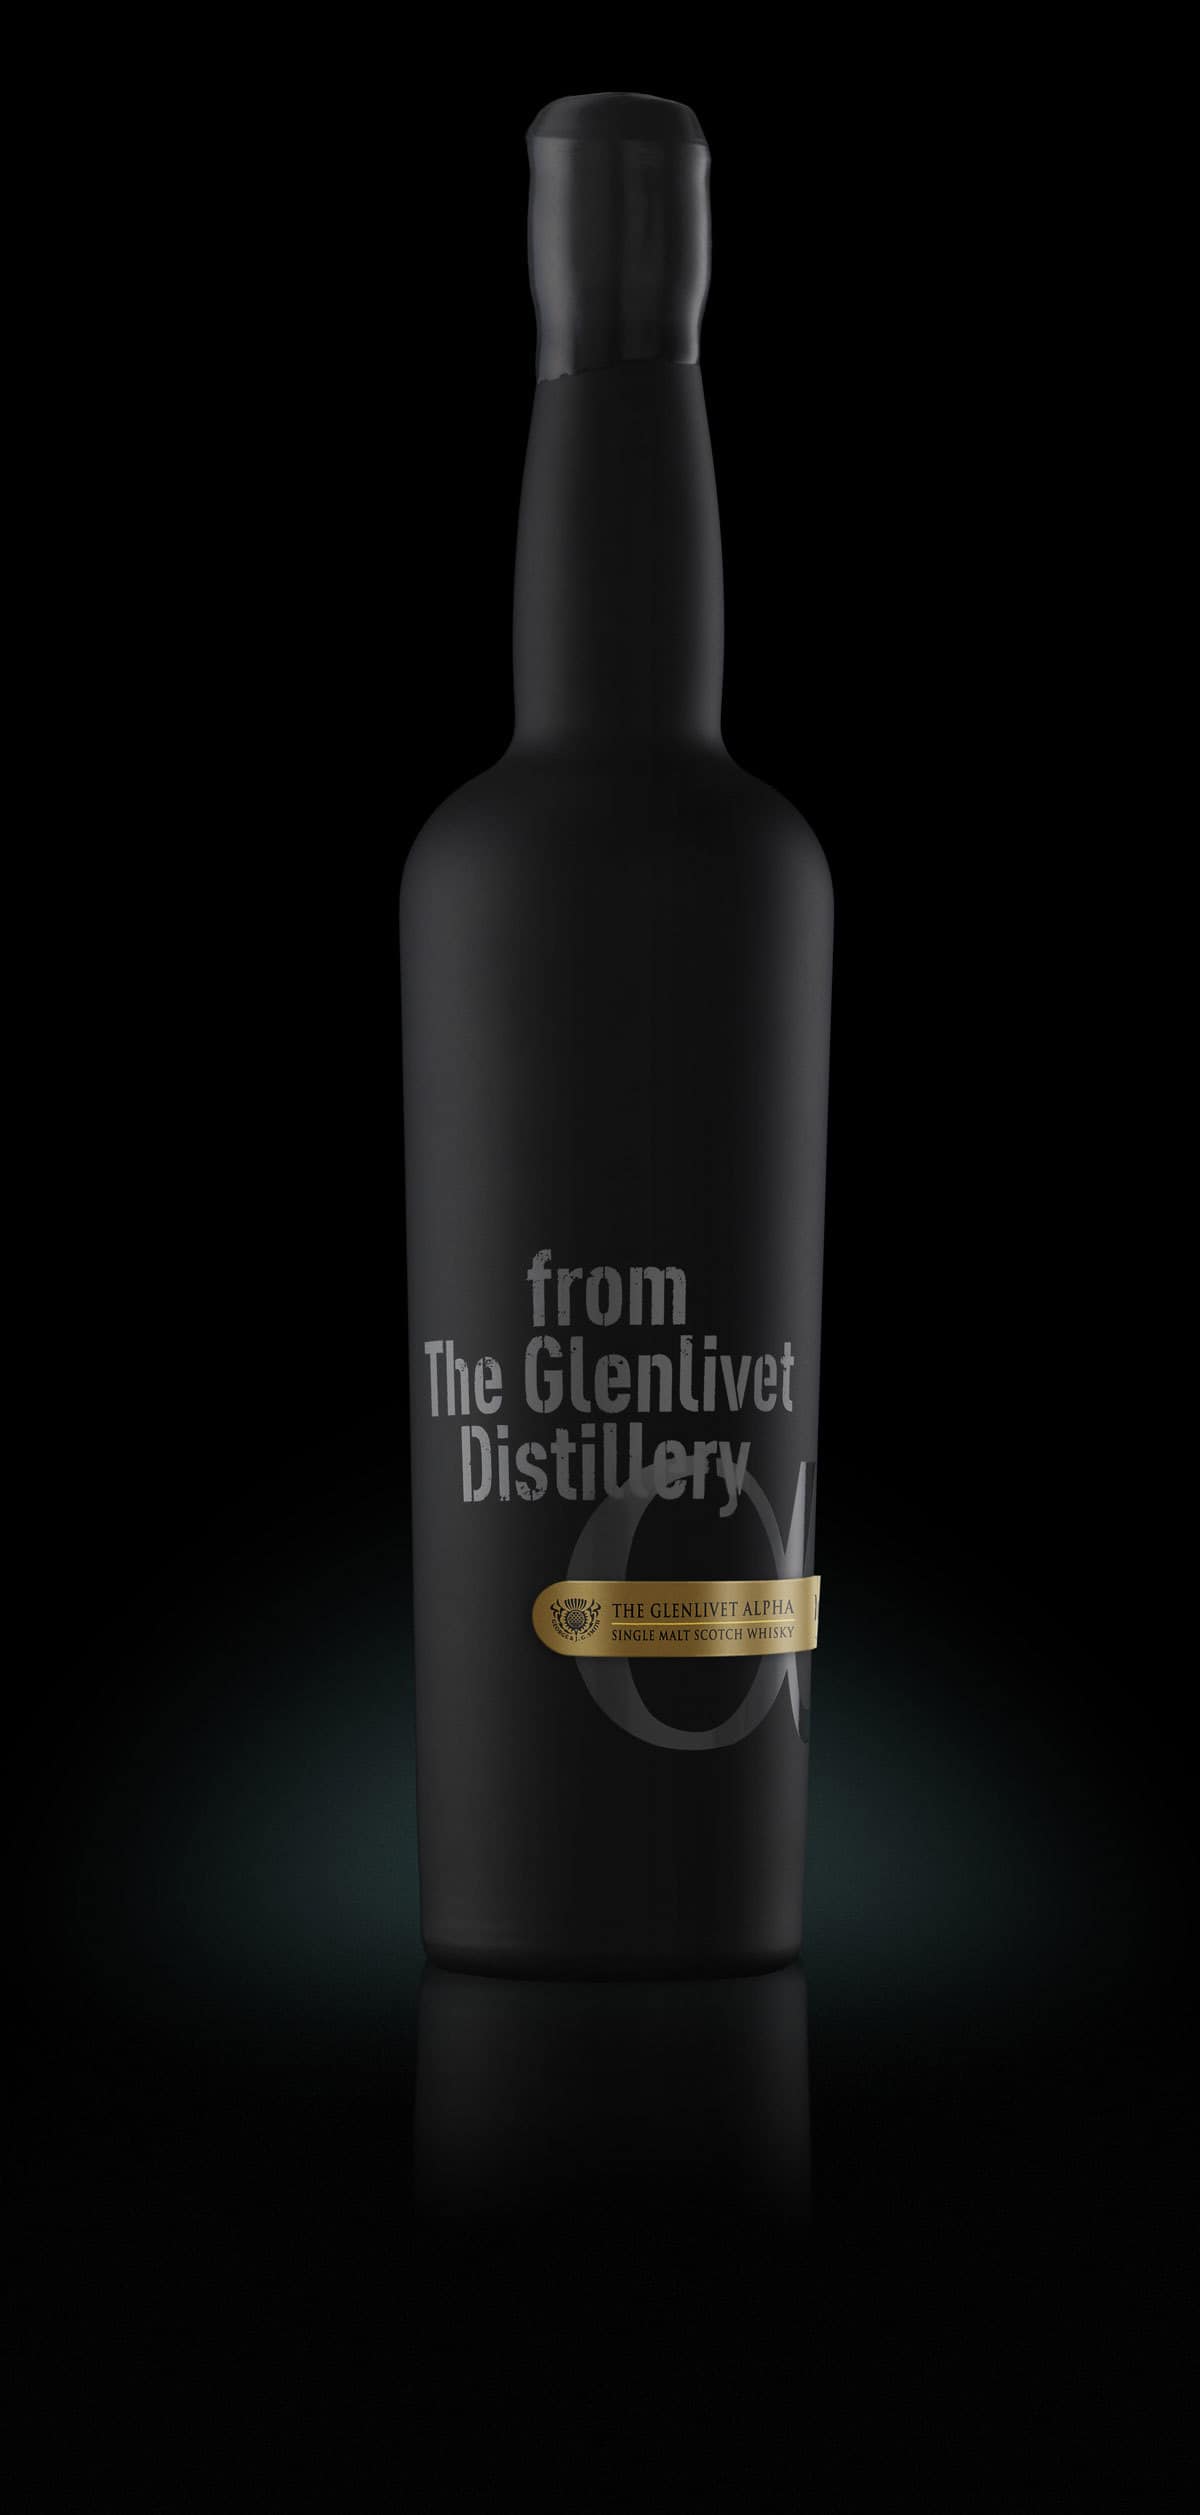 The Glenlivet is launching a mysterious new single malt whiskey christened Alpha